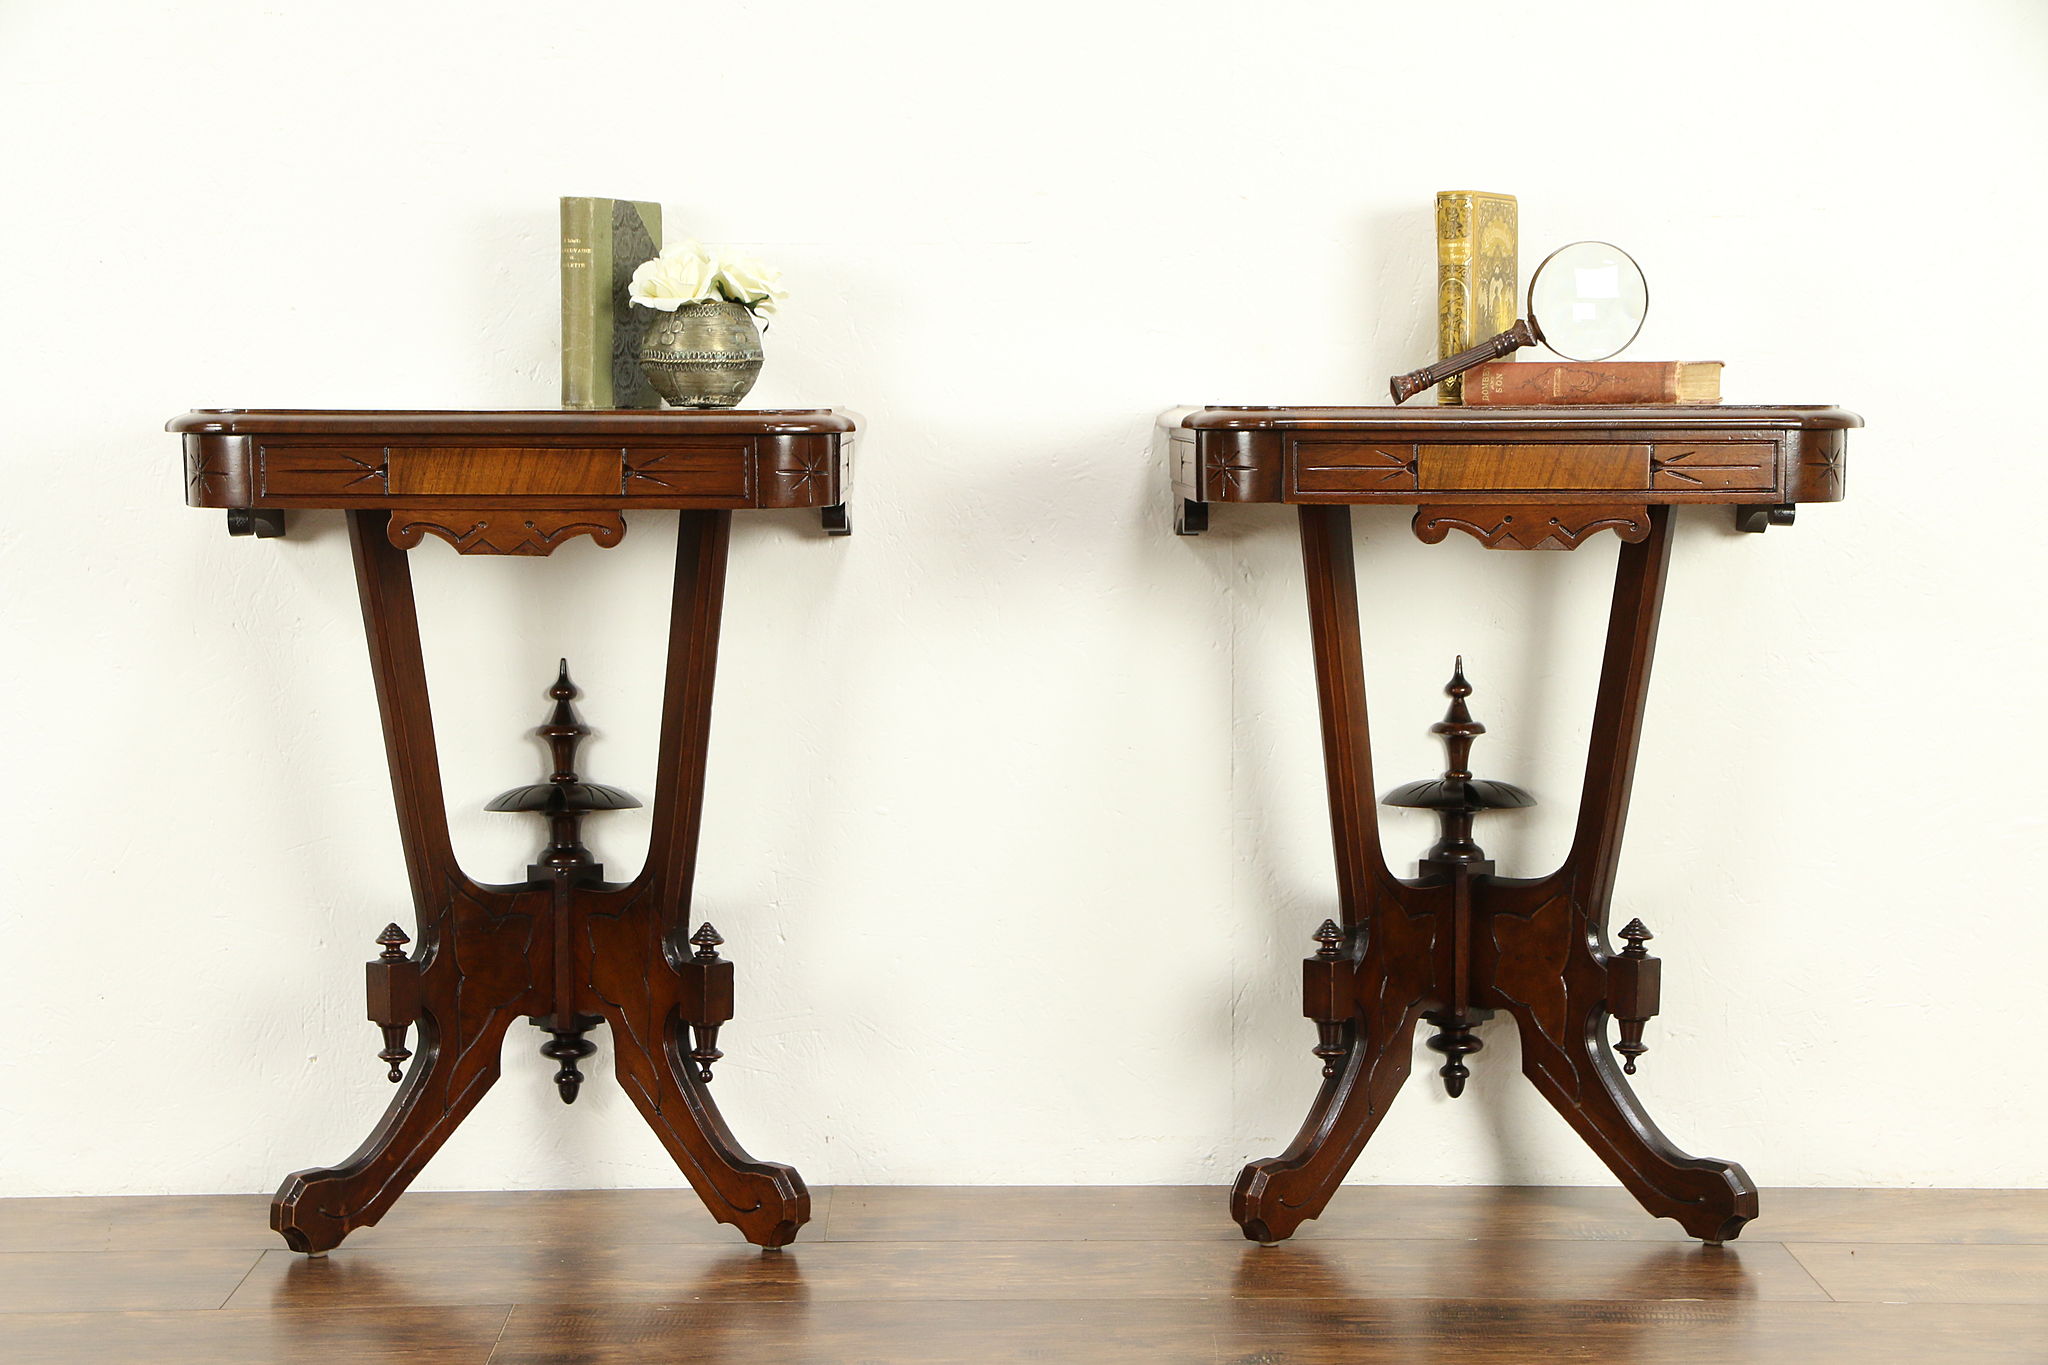 Sold Pair Of Victorian Eastlake Antique Walnut Wall Console Tables 32135 Harp Gallery Antiques Furniture,Haworthia Succulent